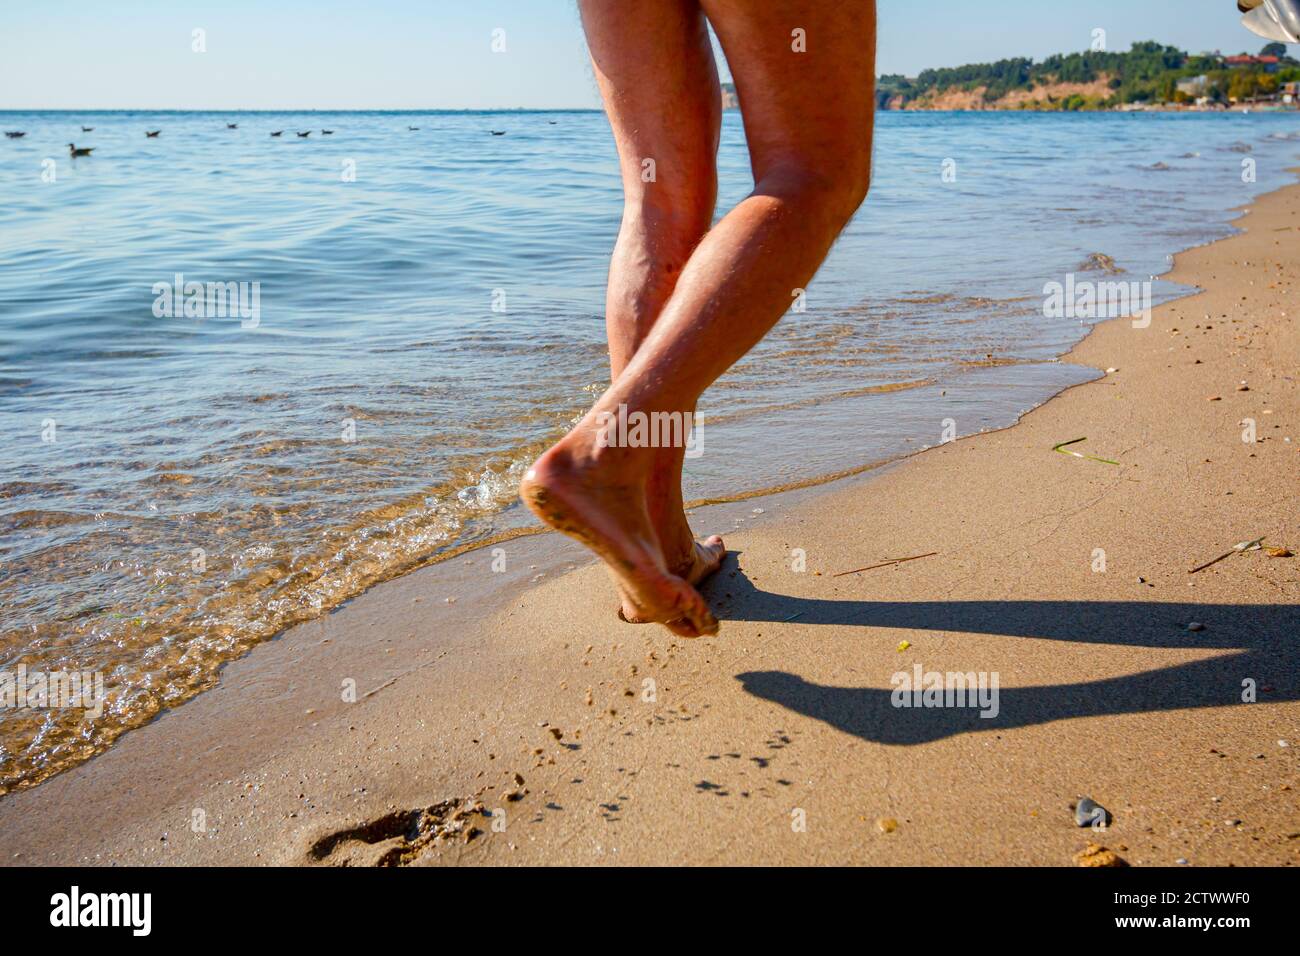 Man's legs are walking barefoot on the sandy beach next to the shallow sea water. Stock Photo